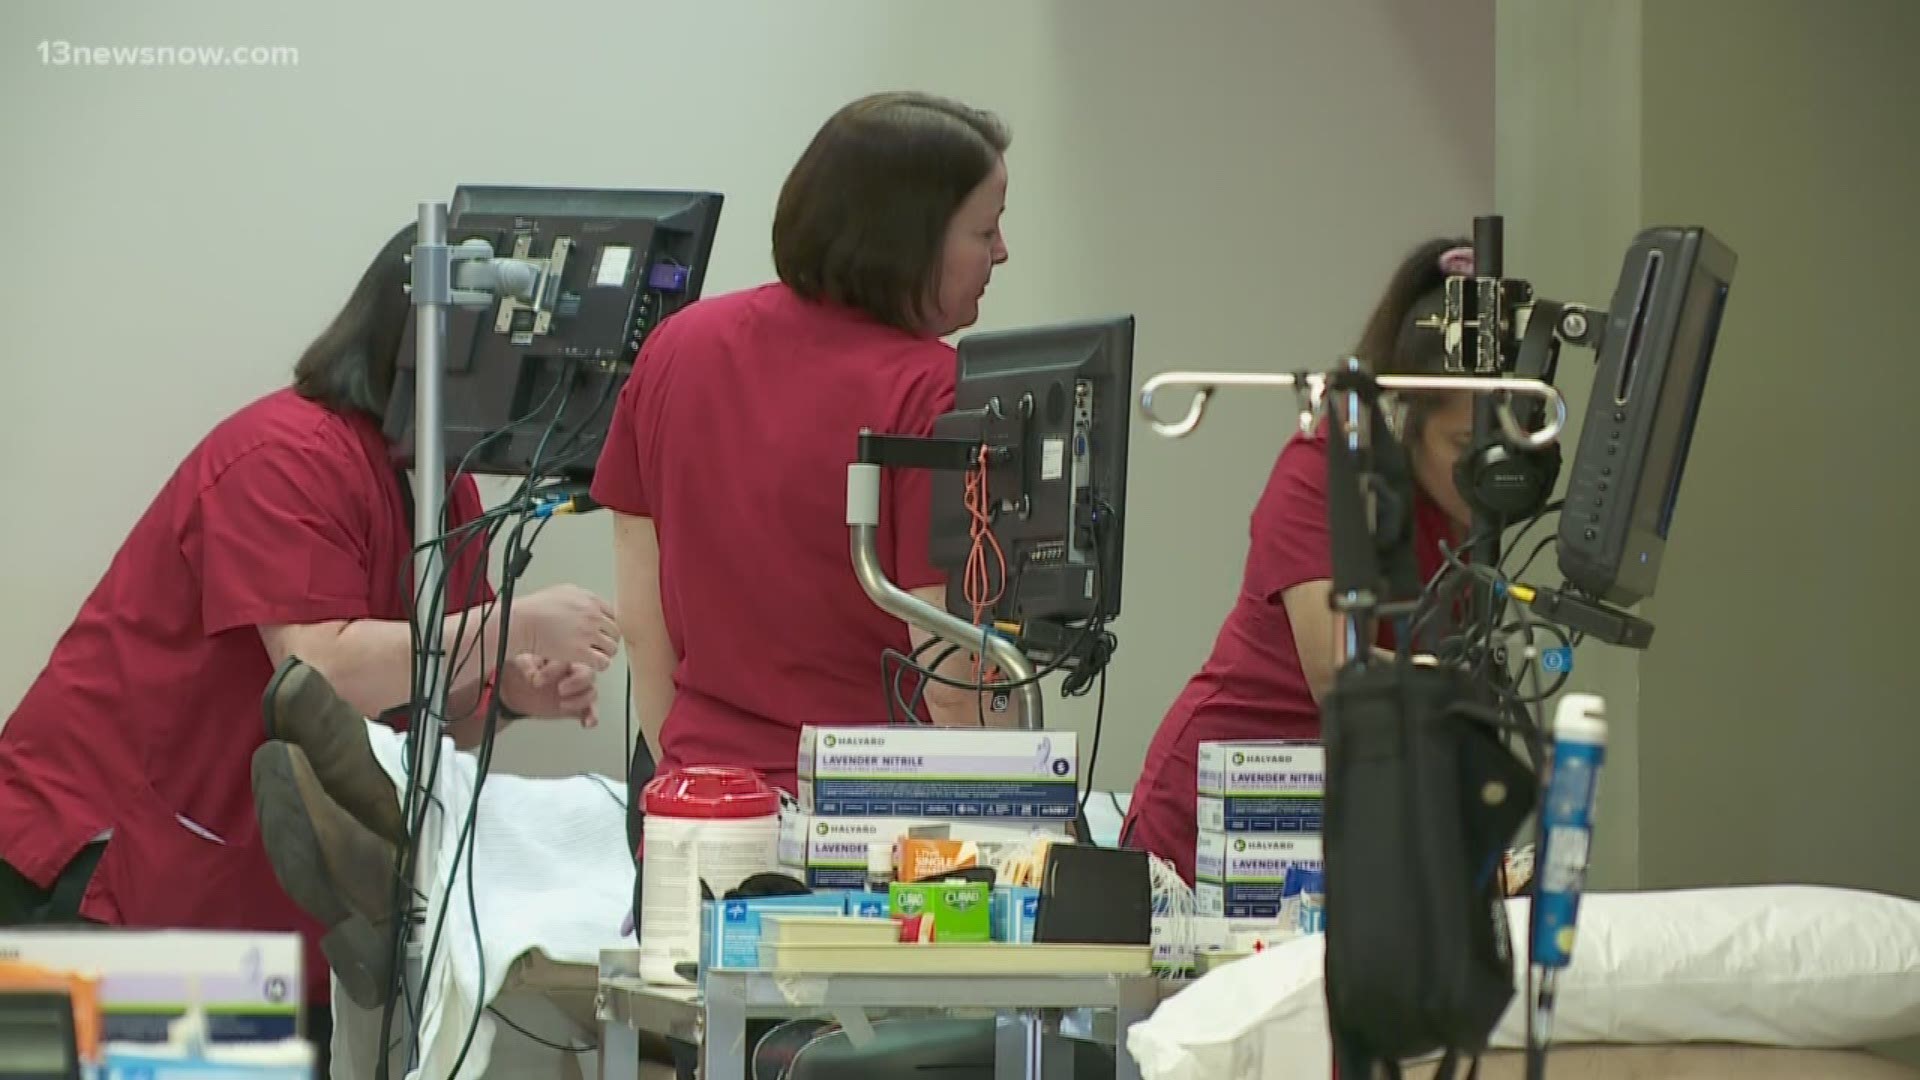 Many blood drives have been canceled along with events after coronavirus guidelines mandated social distancing - but the Red Cross said it still needs blood.